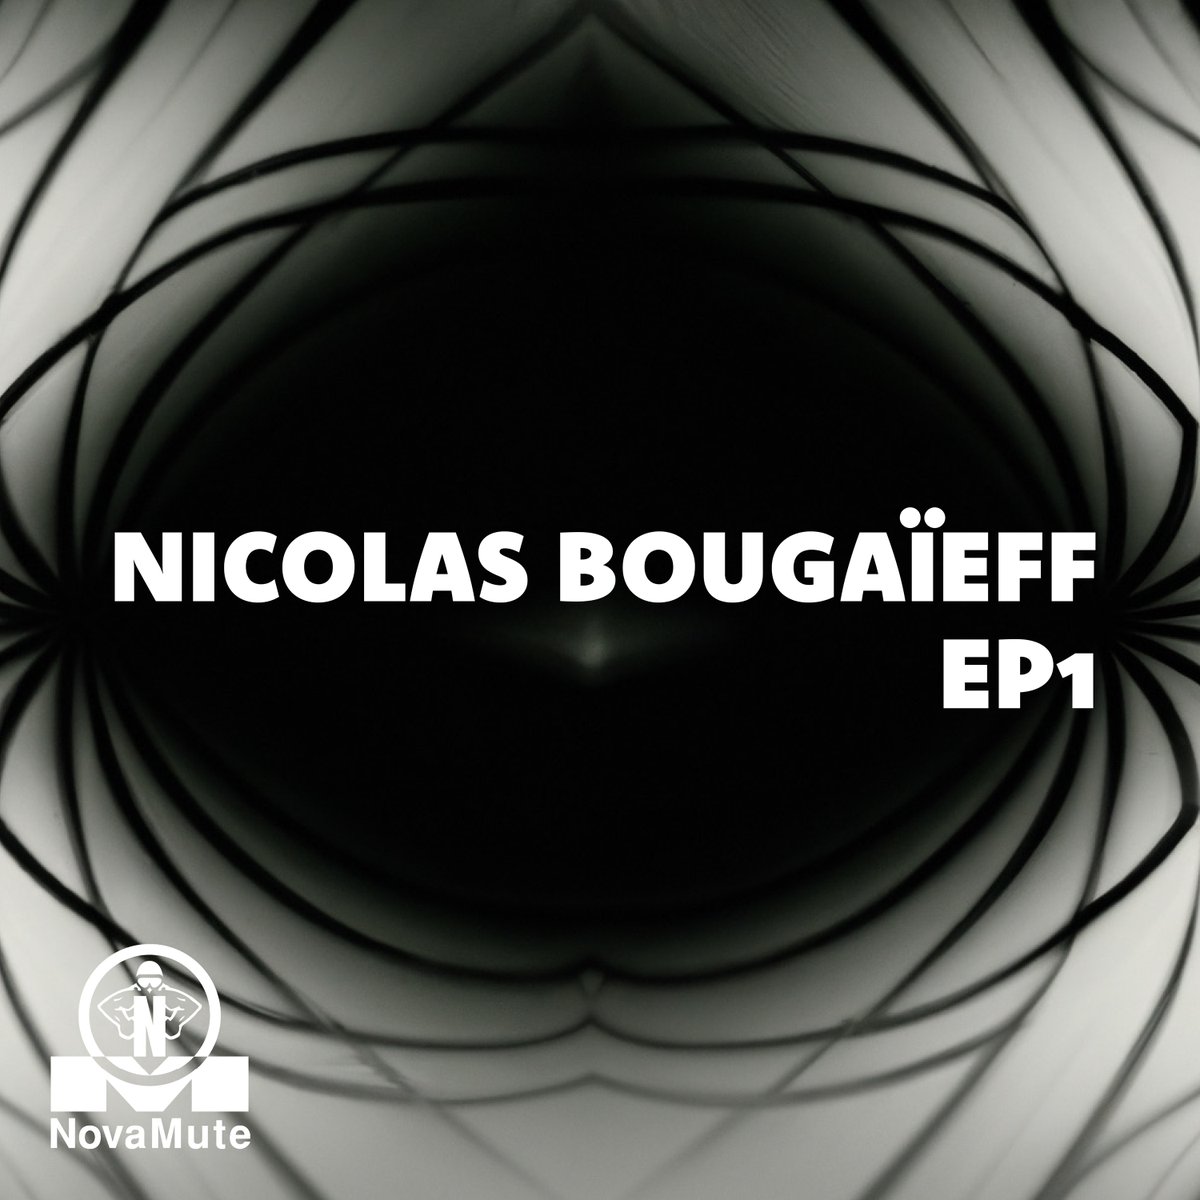 The 1st instalment of a new digital EP series by @nbougaieff is out on 19th Oct via NovaMute. 'Concrete Love' is a solid cut of hard-edged techno grooves w/ a quintessential Bougaïeff shrieking hook at its peak. Check it out early now on @beatport - mute.ffm.to/nb_ep1